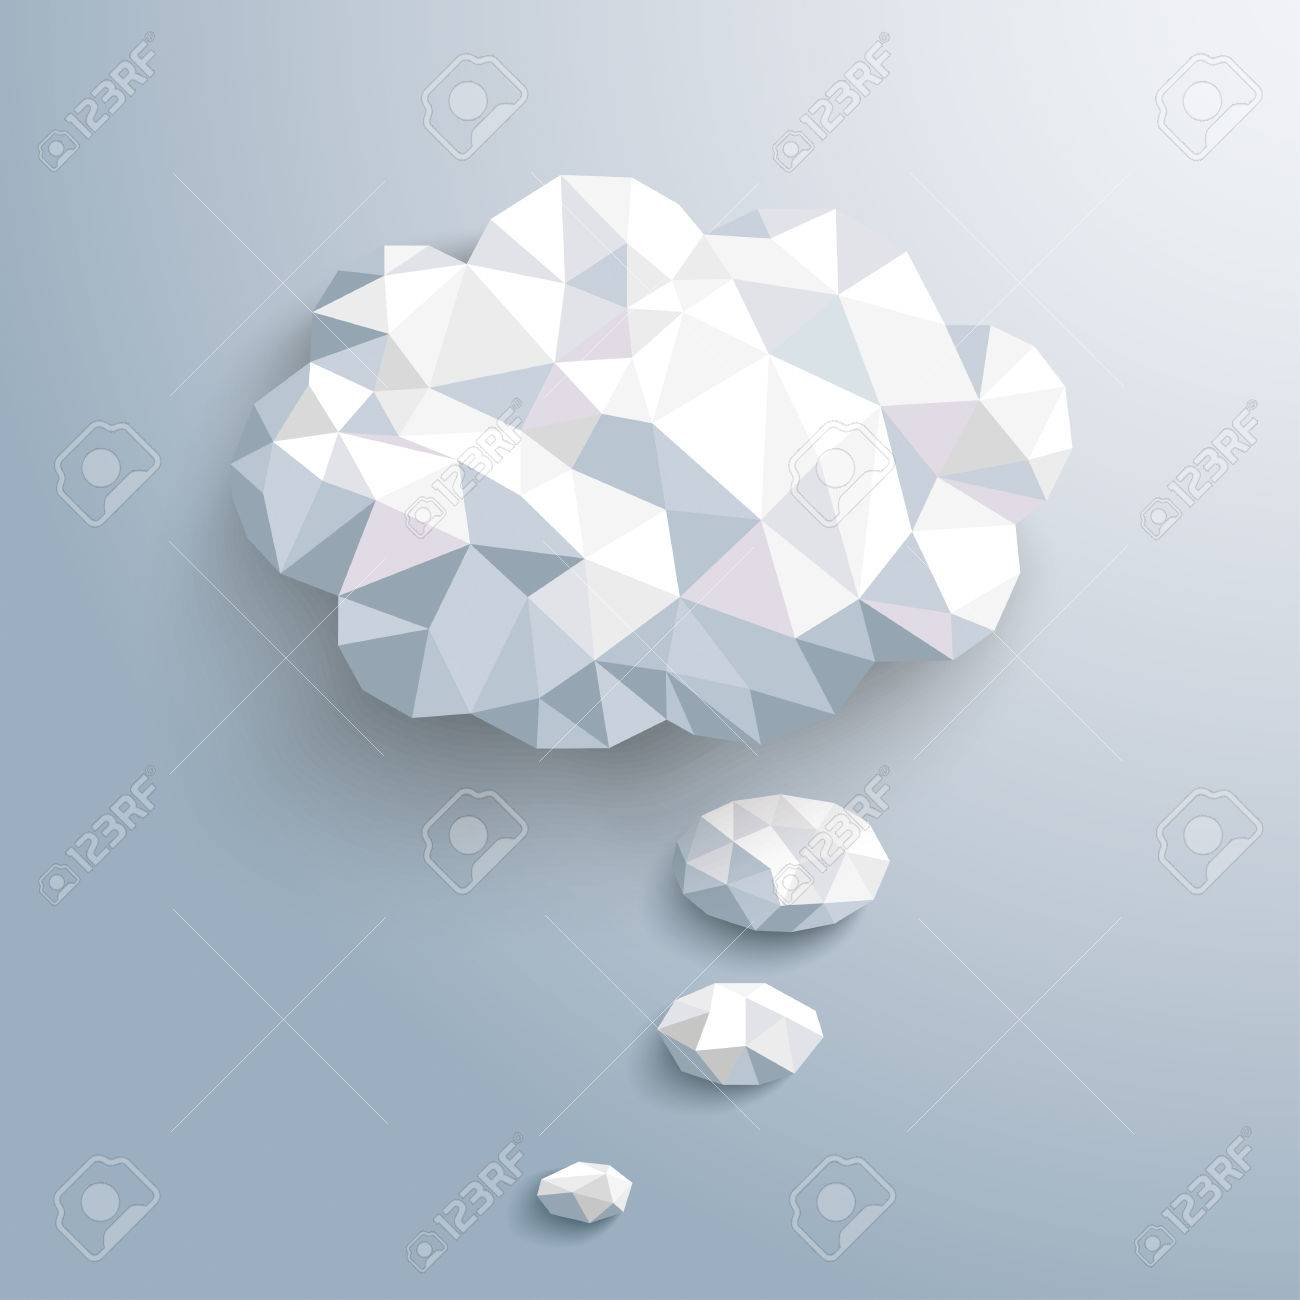 Low Poly Paper Thought Bubble On The Gray Background Eps